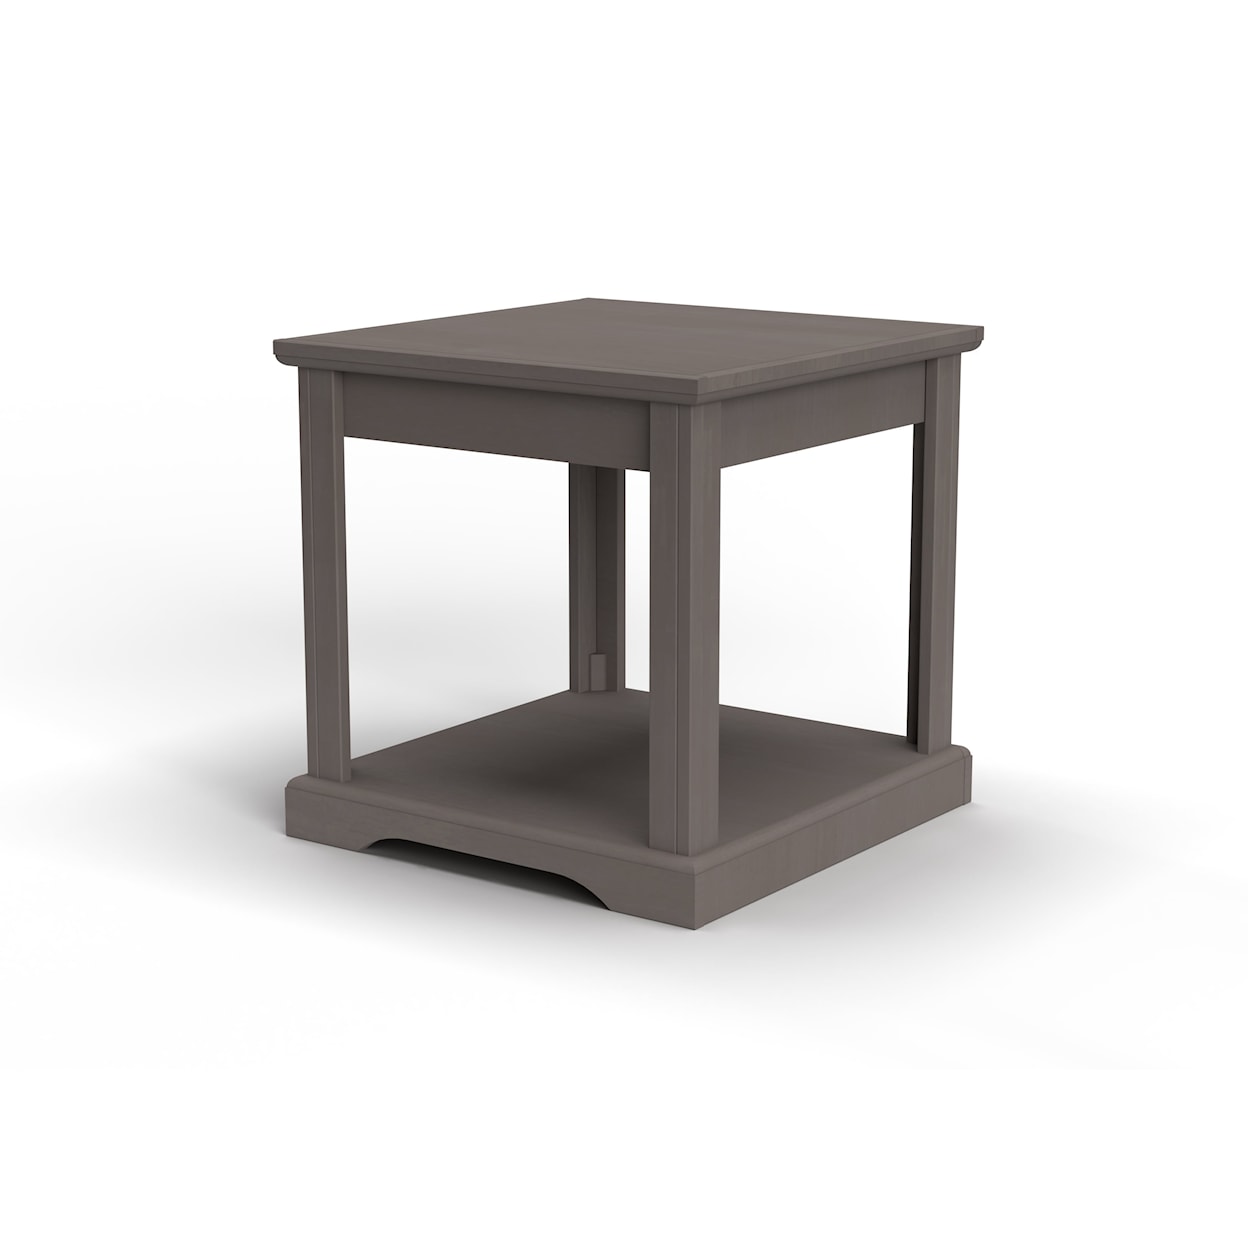 Legends Furniture Cheyenne End Table with Fixed Open Shelf